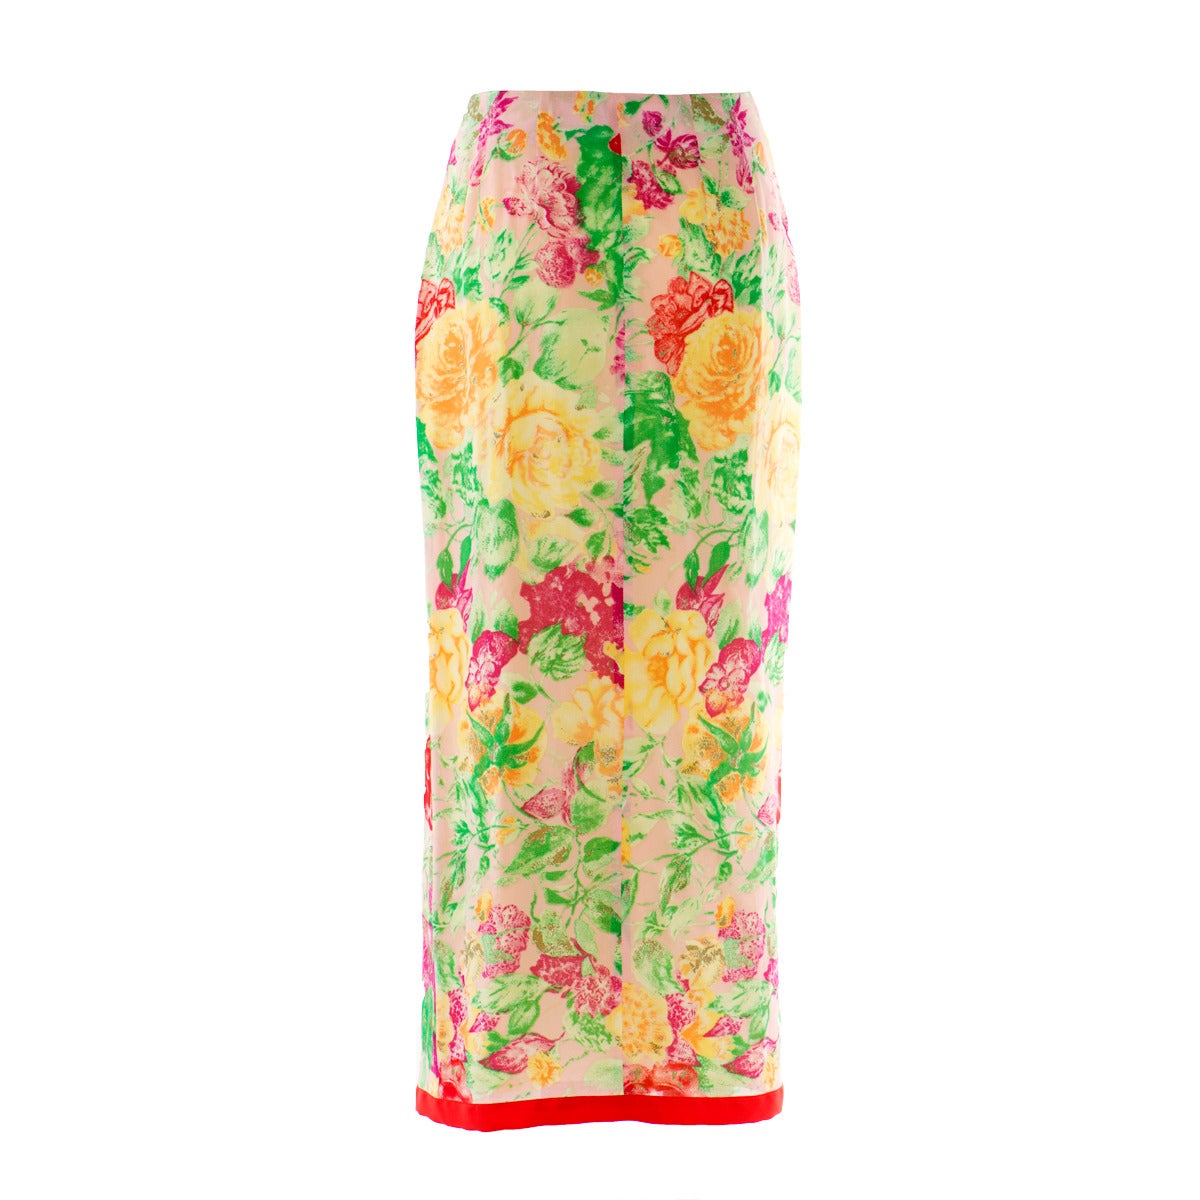 Fantastic skirt by Kenzo Paris
Vintage from the 90's
Amazing mix of colors like pale rose, yellow, red, green, fuchsia
Material : Viscose and silk (lining)
Made in France
Size 38 french (42 italian - 6/8 US)
Worldwide express shipping included